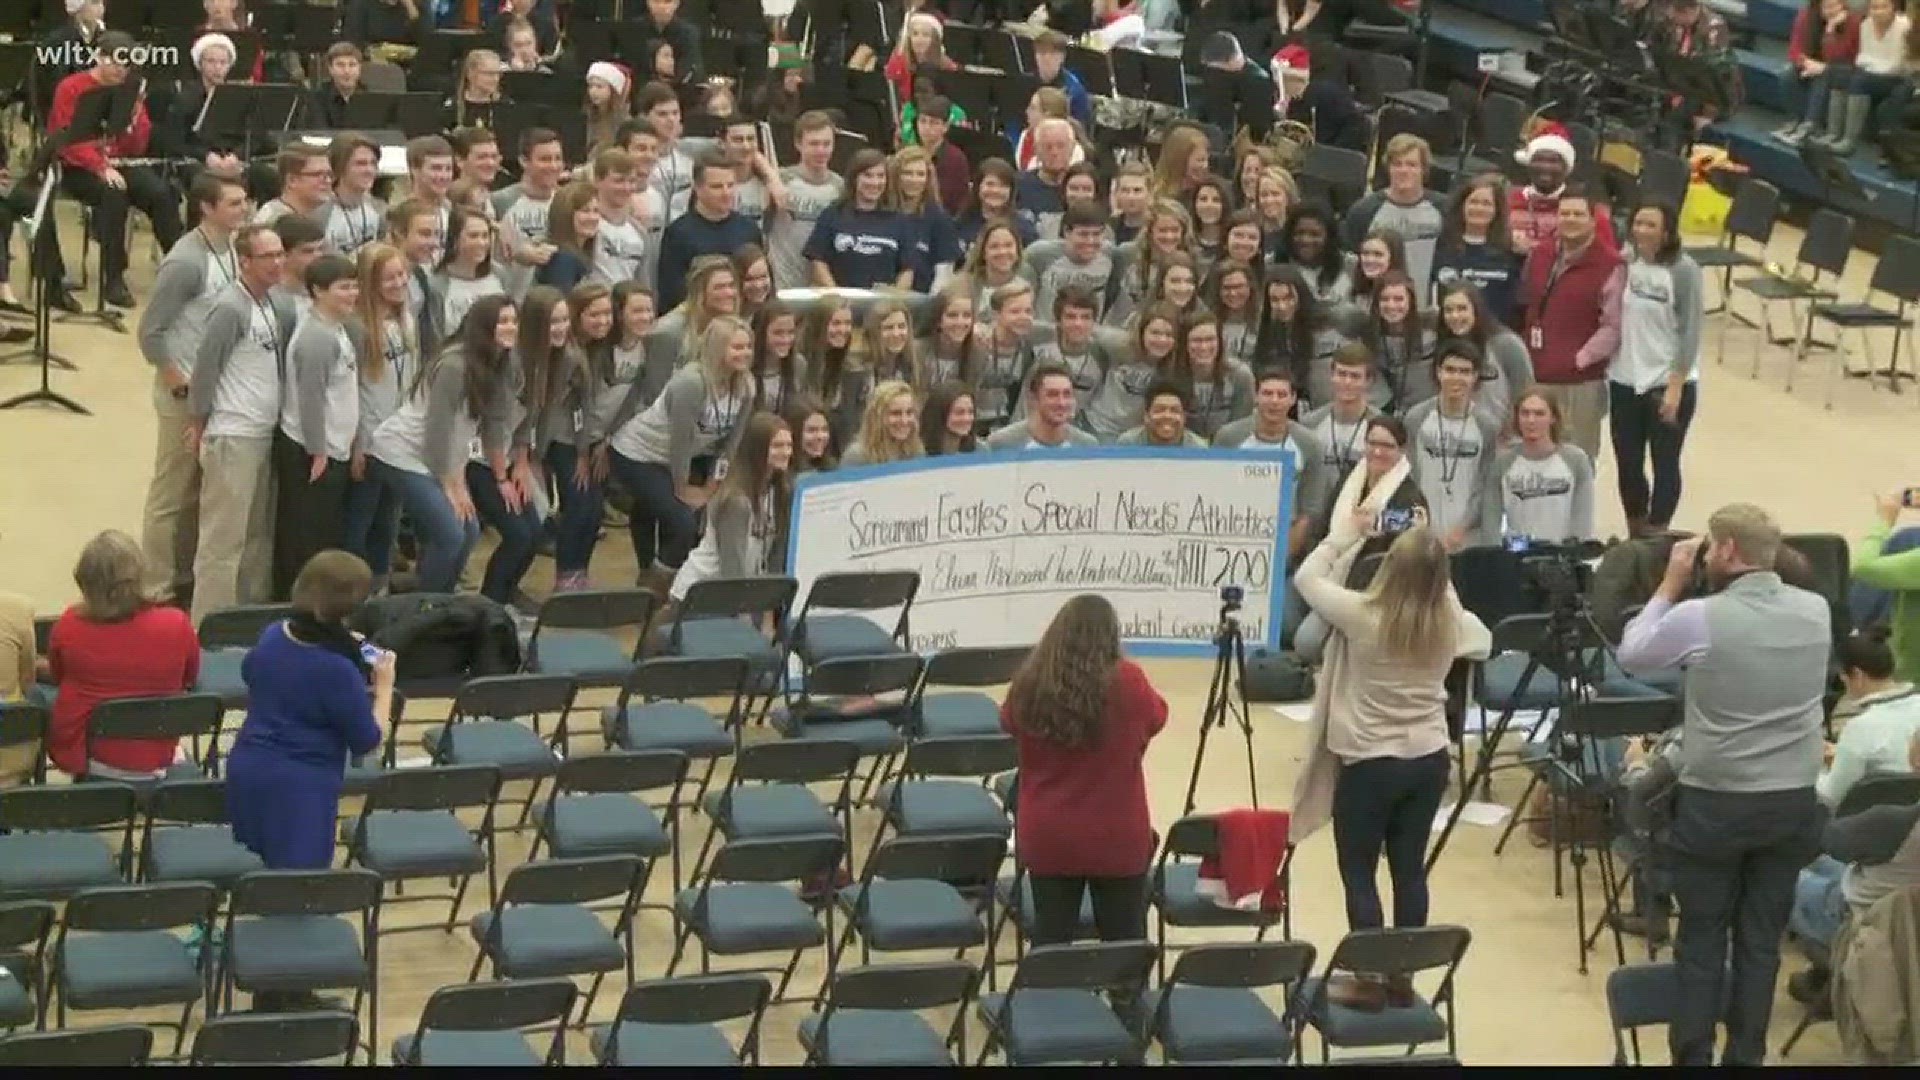 Chapin High School held their winter  Giving Assembly this morning.During the event the student government announced they are giving $111,000 for a project supporting special needs athletes.	The Screaming Eagles Special Needs Athletic team is a Chapin-ba